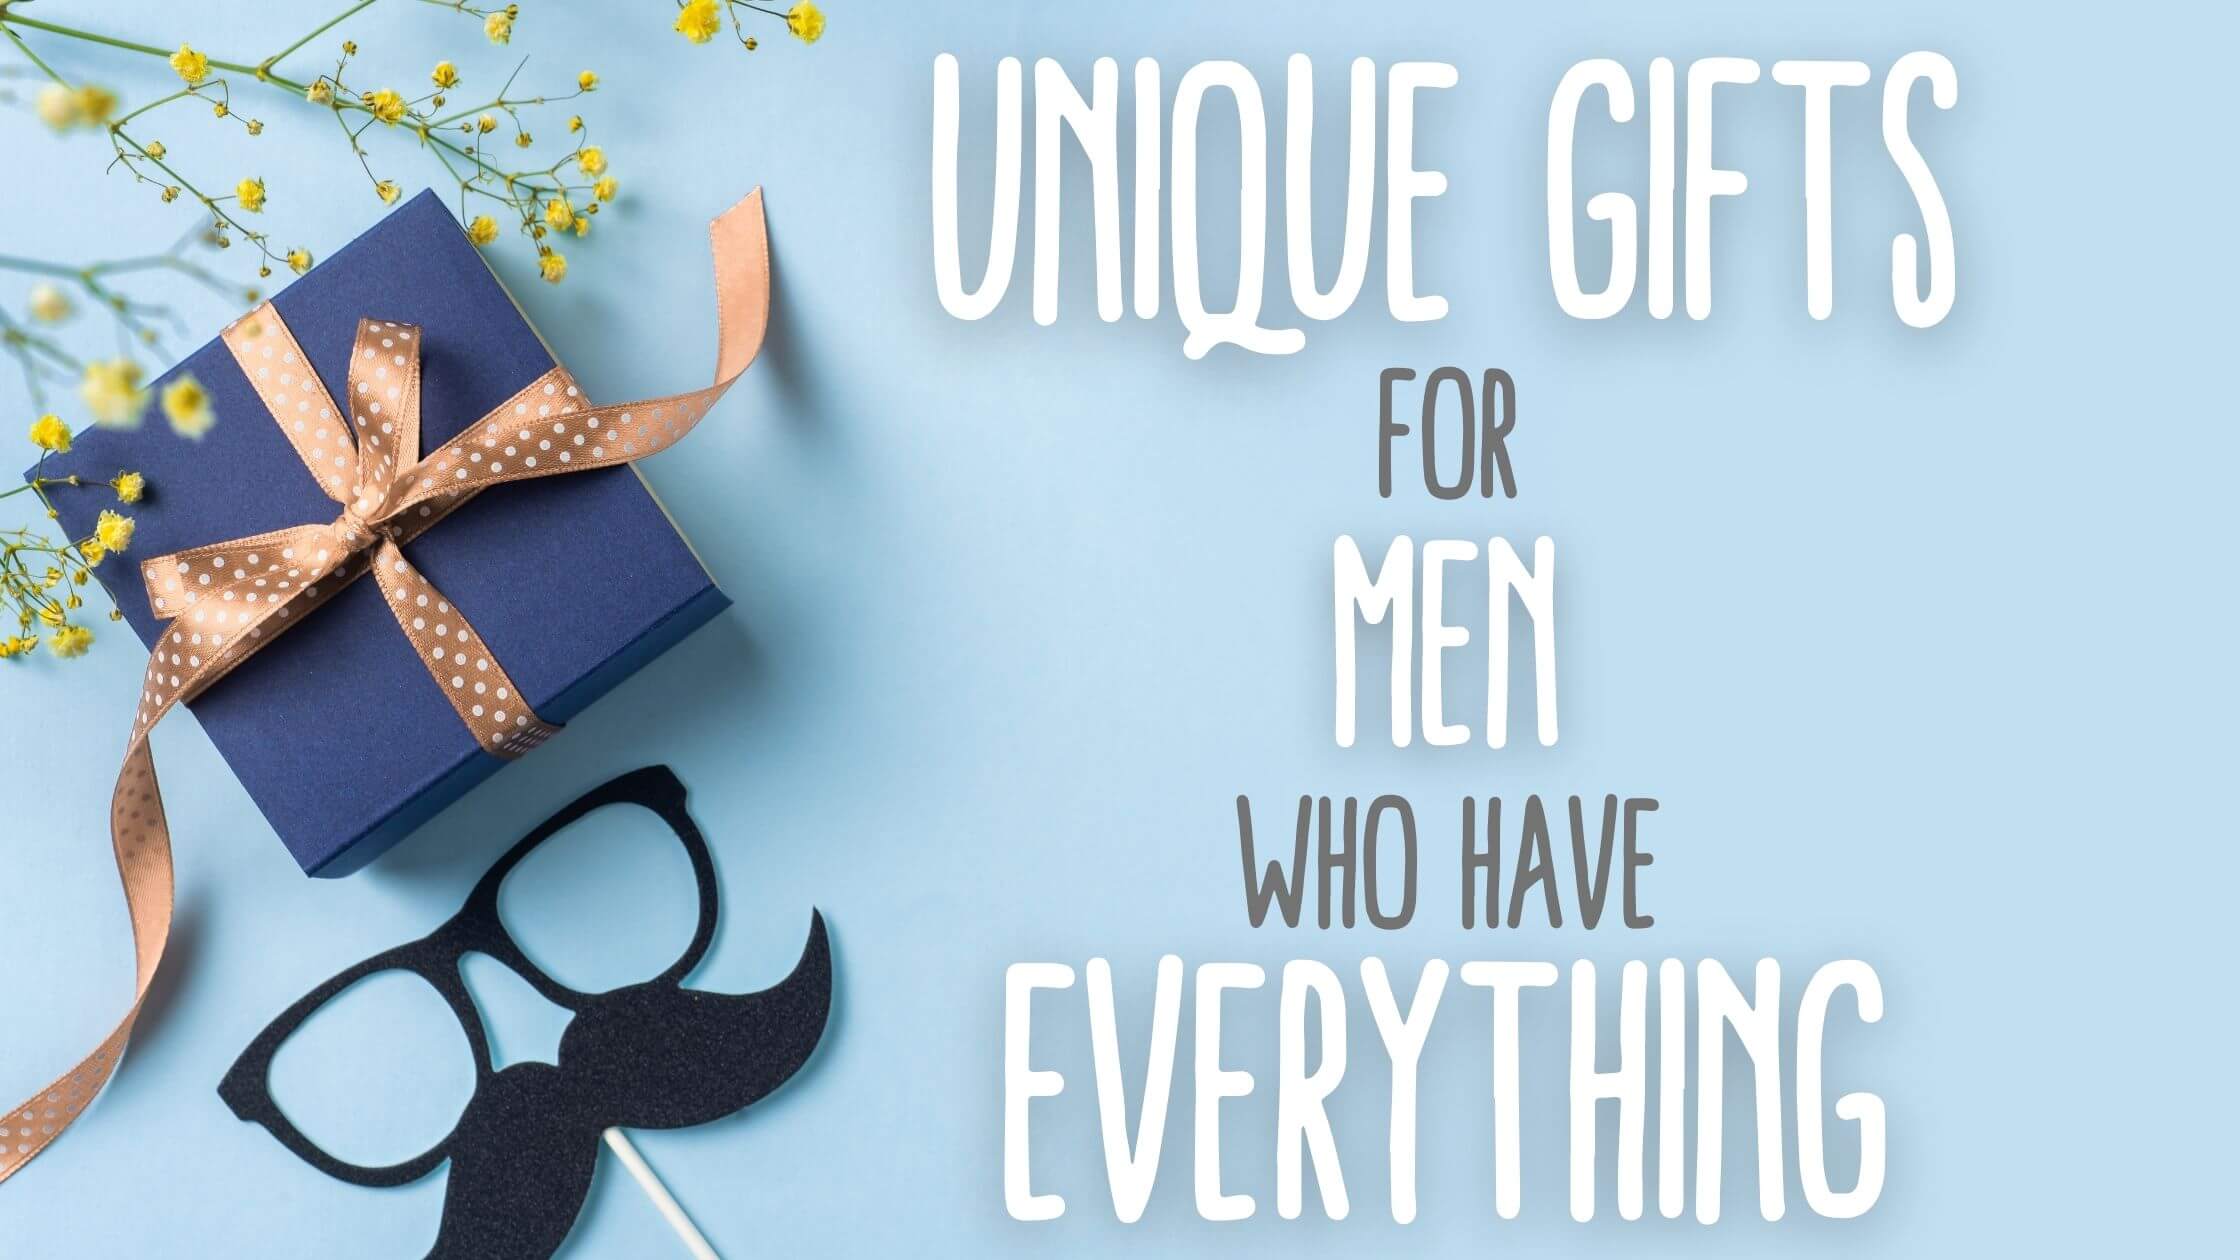 15 Unique Gifts for Men Who Have Everything (and want nothing)